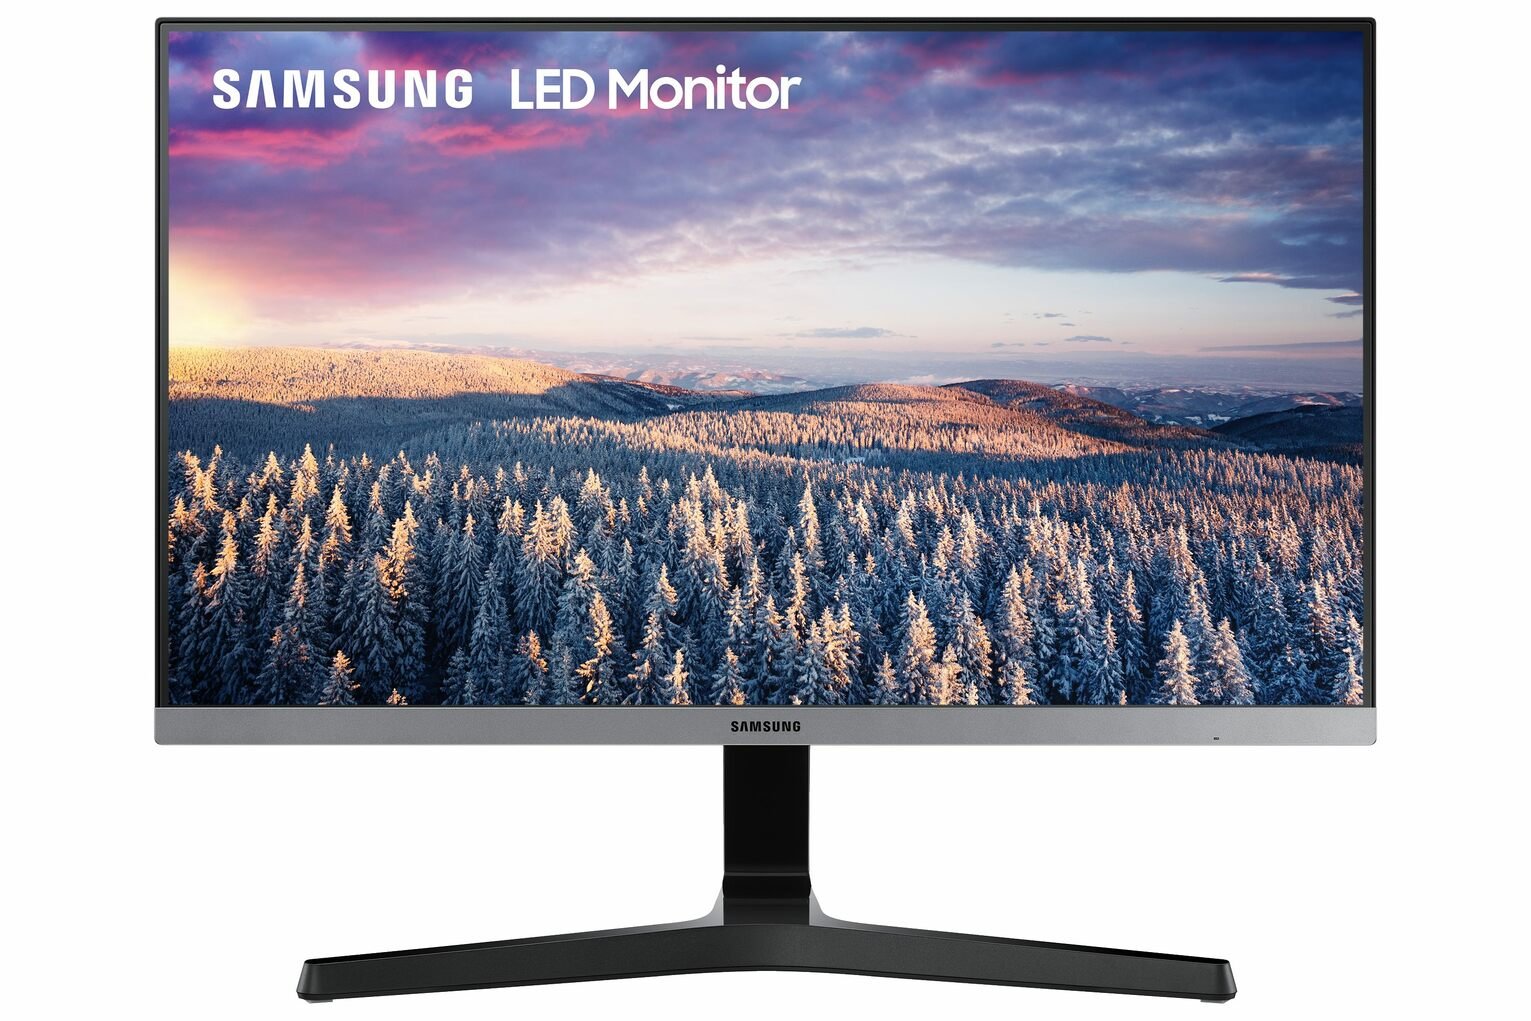 Samsung SR35 23.8 Inch FHD LED Monitor Review